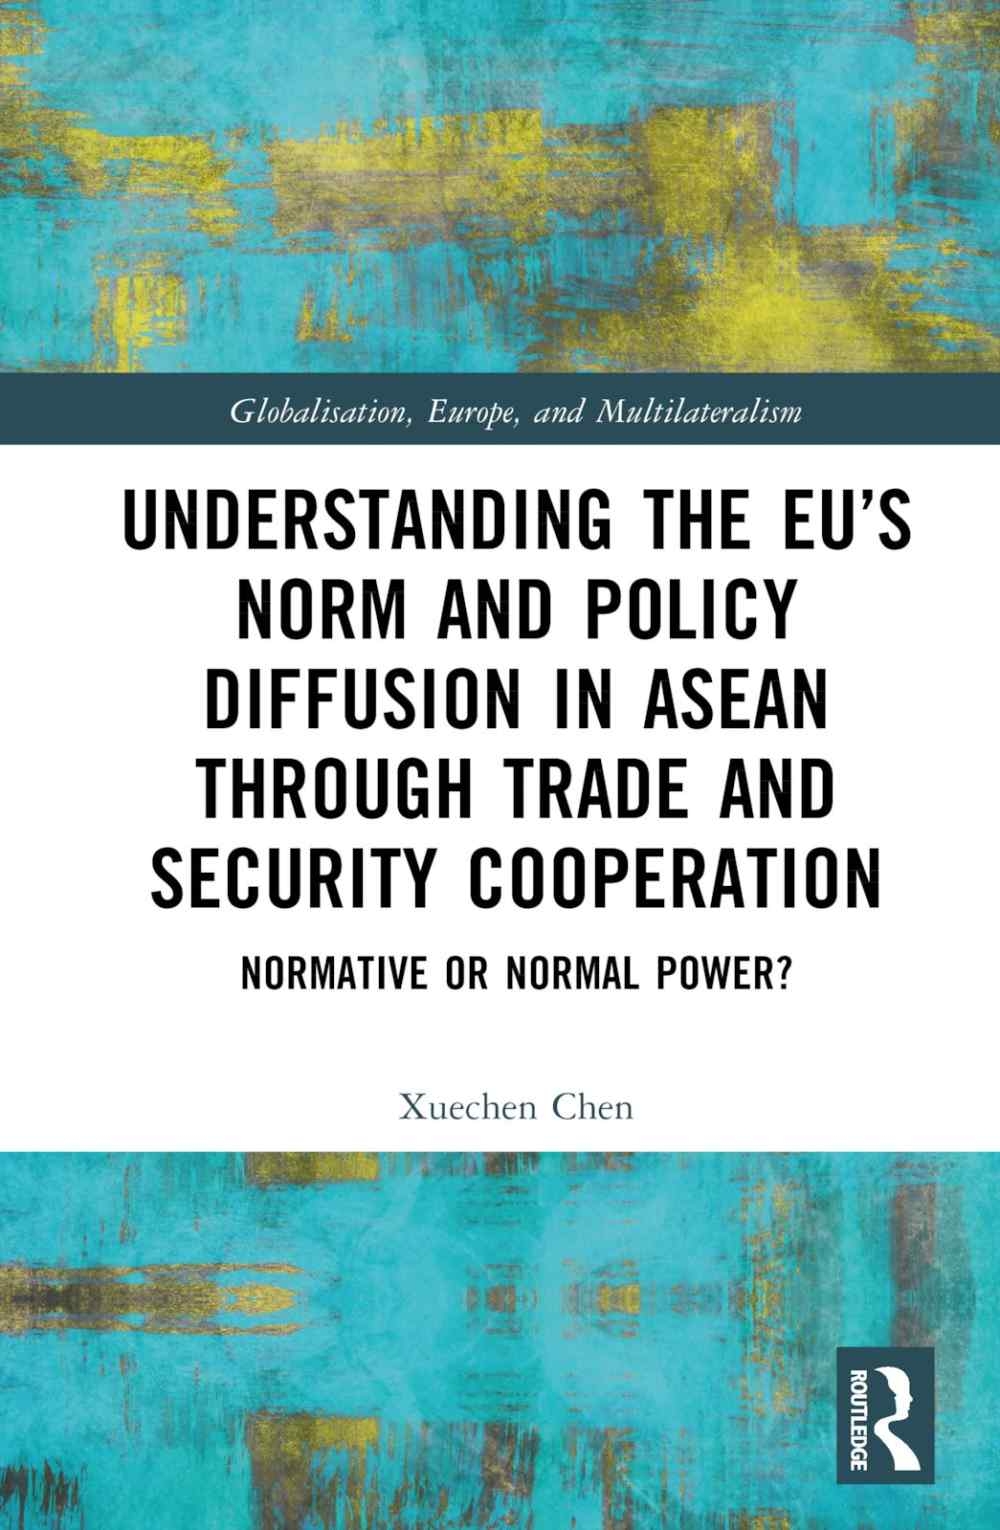 Understanding the Eu’s Norm and Policy Diffusion in ASEAN Through Trade and Security Cooperation: Normative or Normal Power?